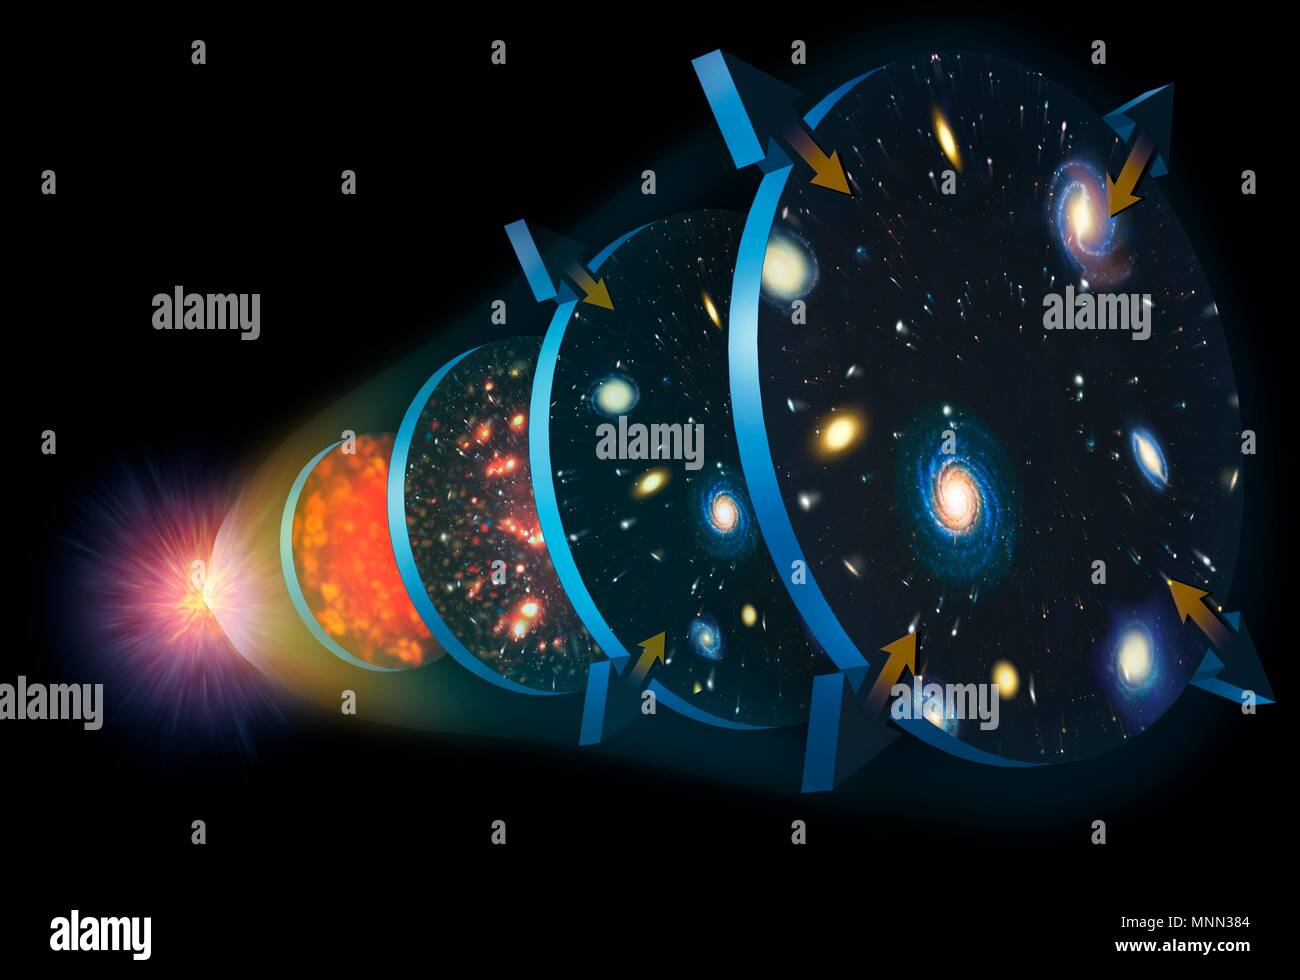 Illustration of the expansion of the Universe. The Cosmos began 13.7 billion years ago in an event dubbed the Big Bang (left). Immediately it began expanding and cooling (stage 1). Eventually, the universe became transparent to radiation, and the first matter was able to form into clumps. Its expansion slowed about 10 billion years ago (stage 2). At stage 3, 5 billion years ago, the universe was full of stars and galaxies, and its expansion began to speed up again because of the mysterious Dark Energy that pervades the Universe. Stock Photo